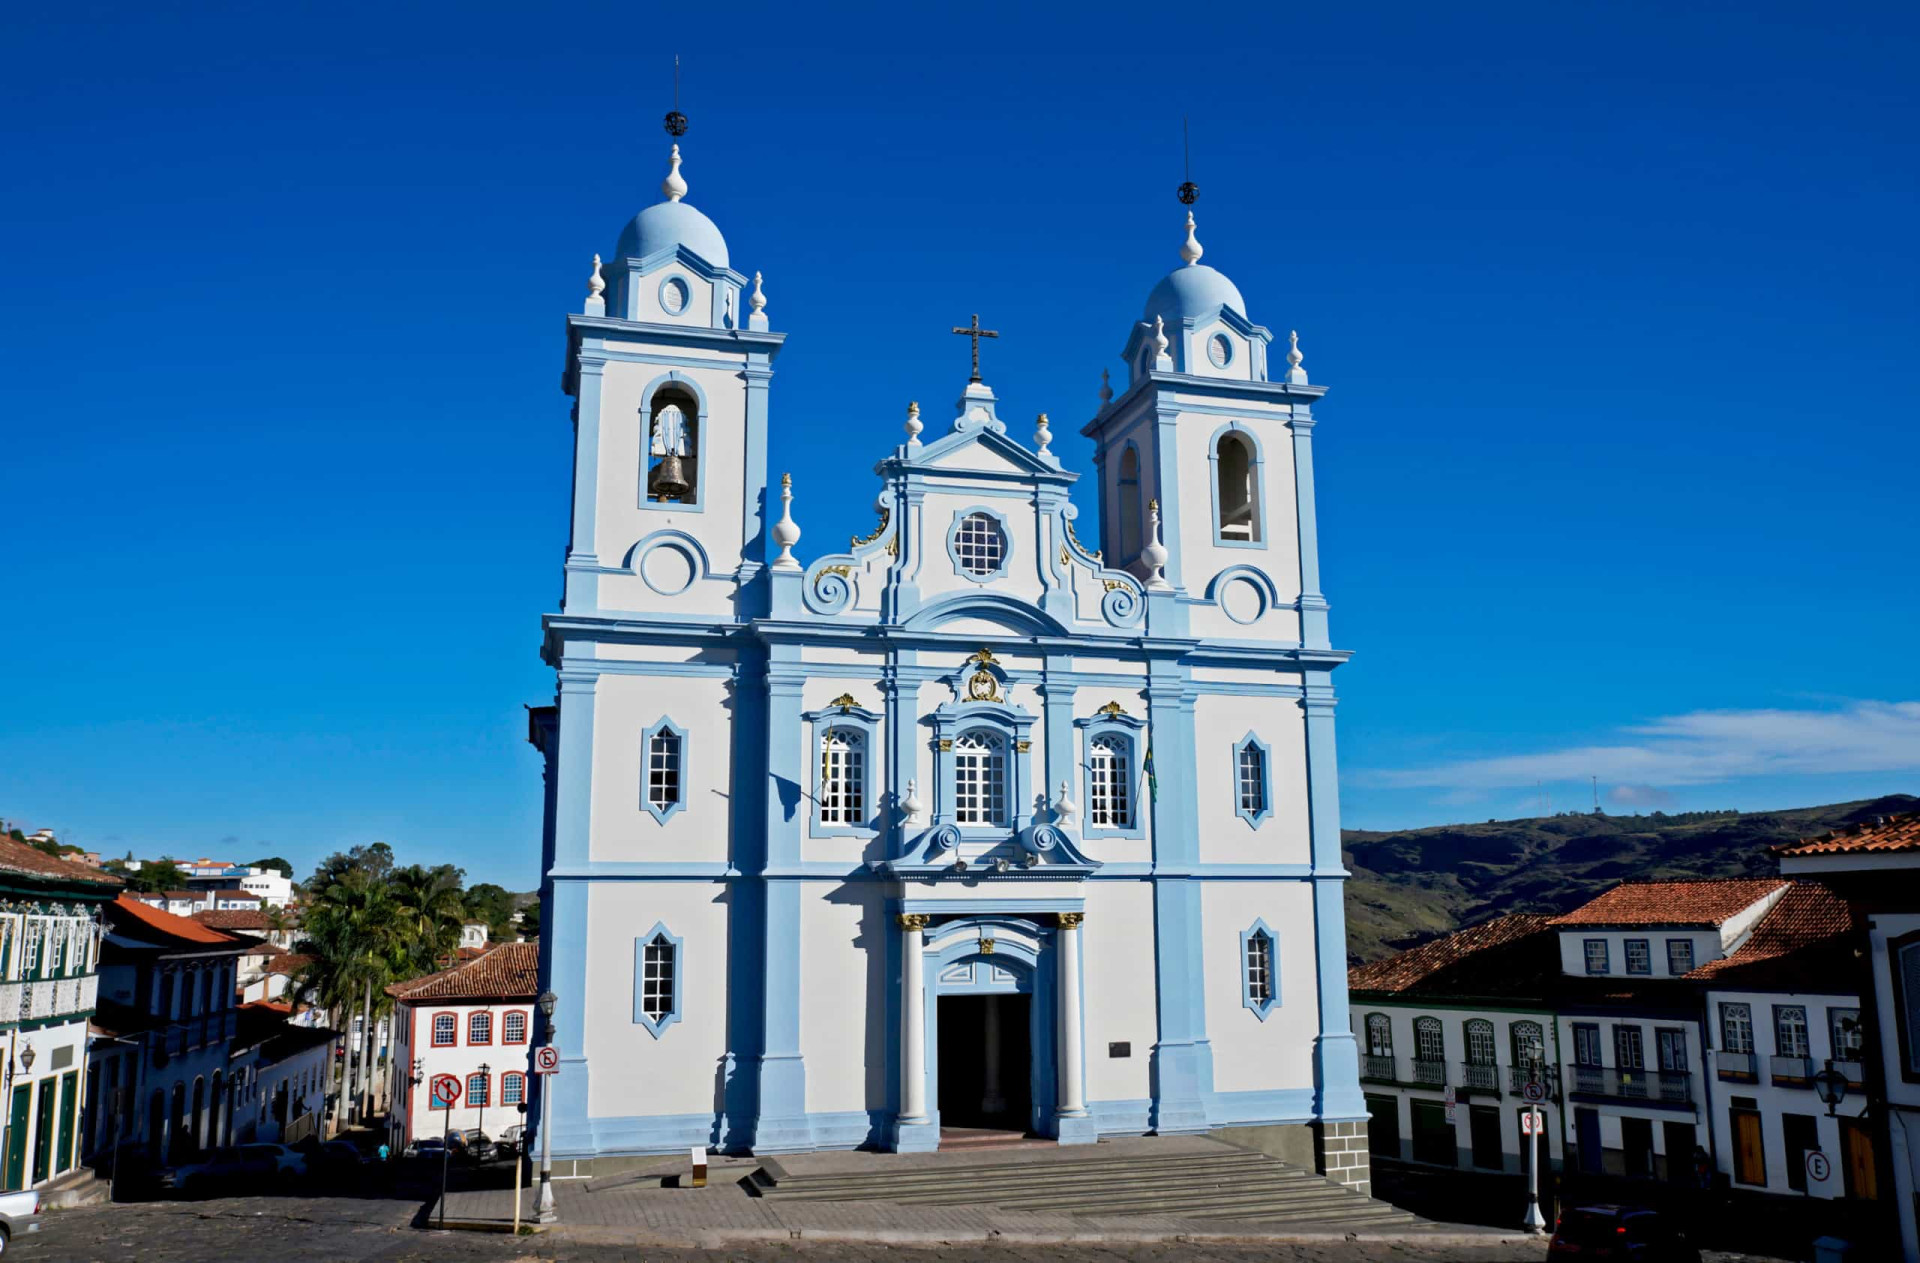 Location: Minas Gerais state<br>Criteria: Cultural<br>Year established: 1999<br>Description: Named after the fact that it was the center of diamond mining in the 18th and 19th centuries, Diamantina is characterized by its collection of Brazilian Baroque architecture.